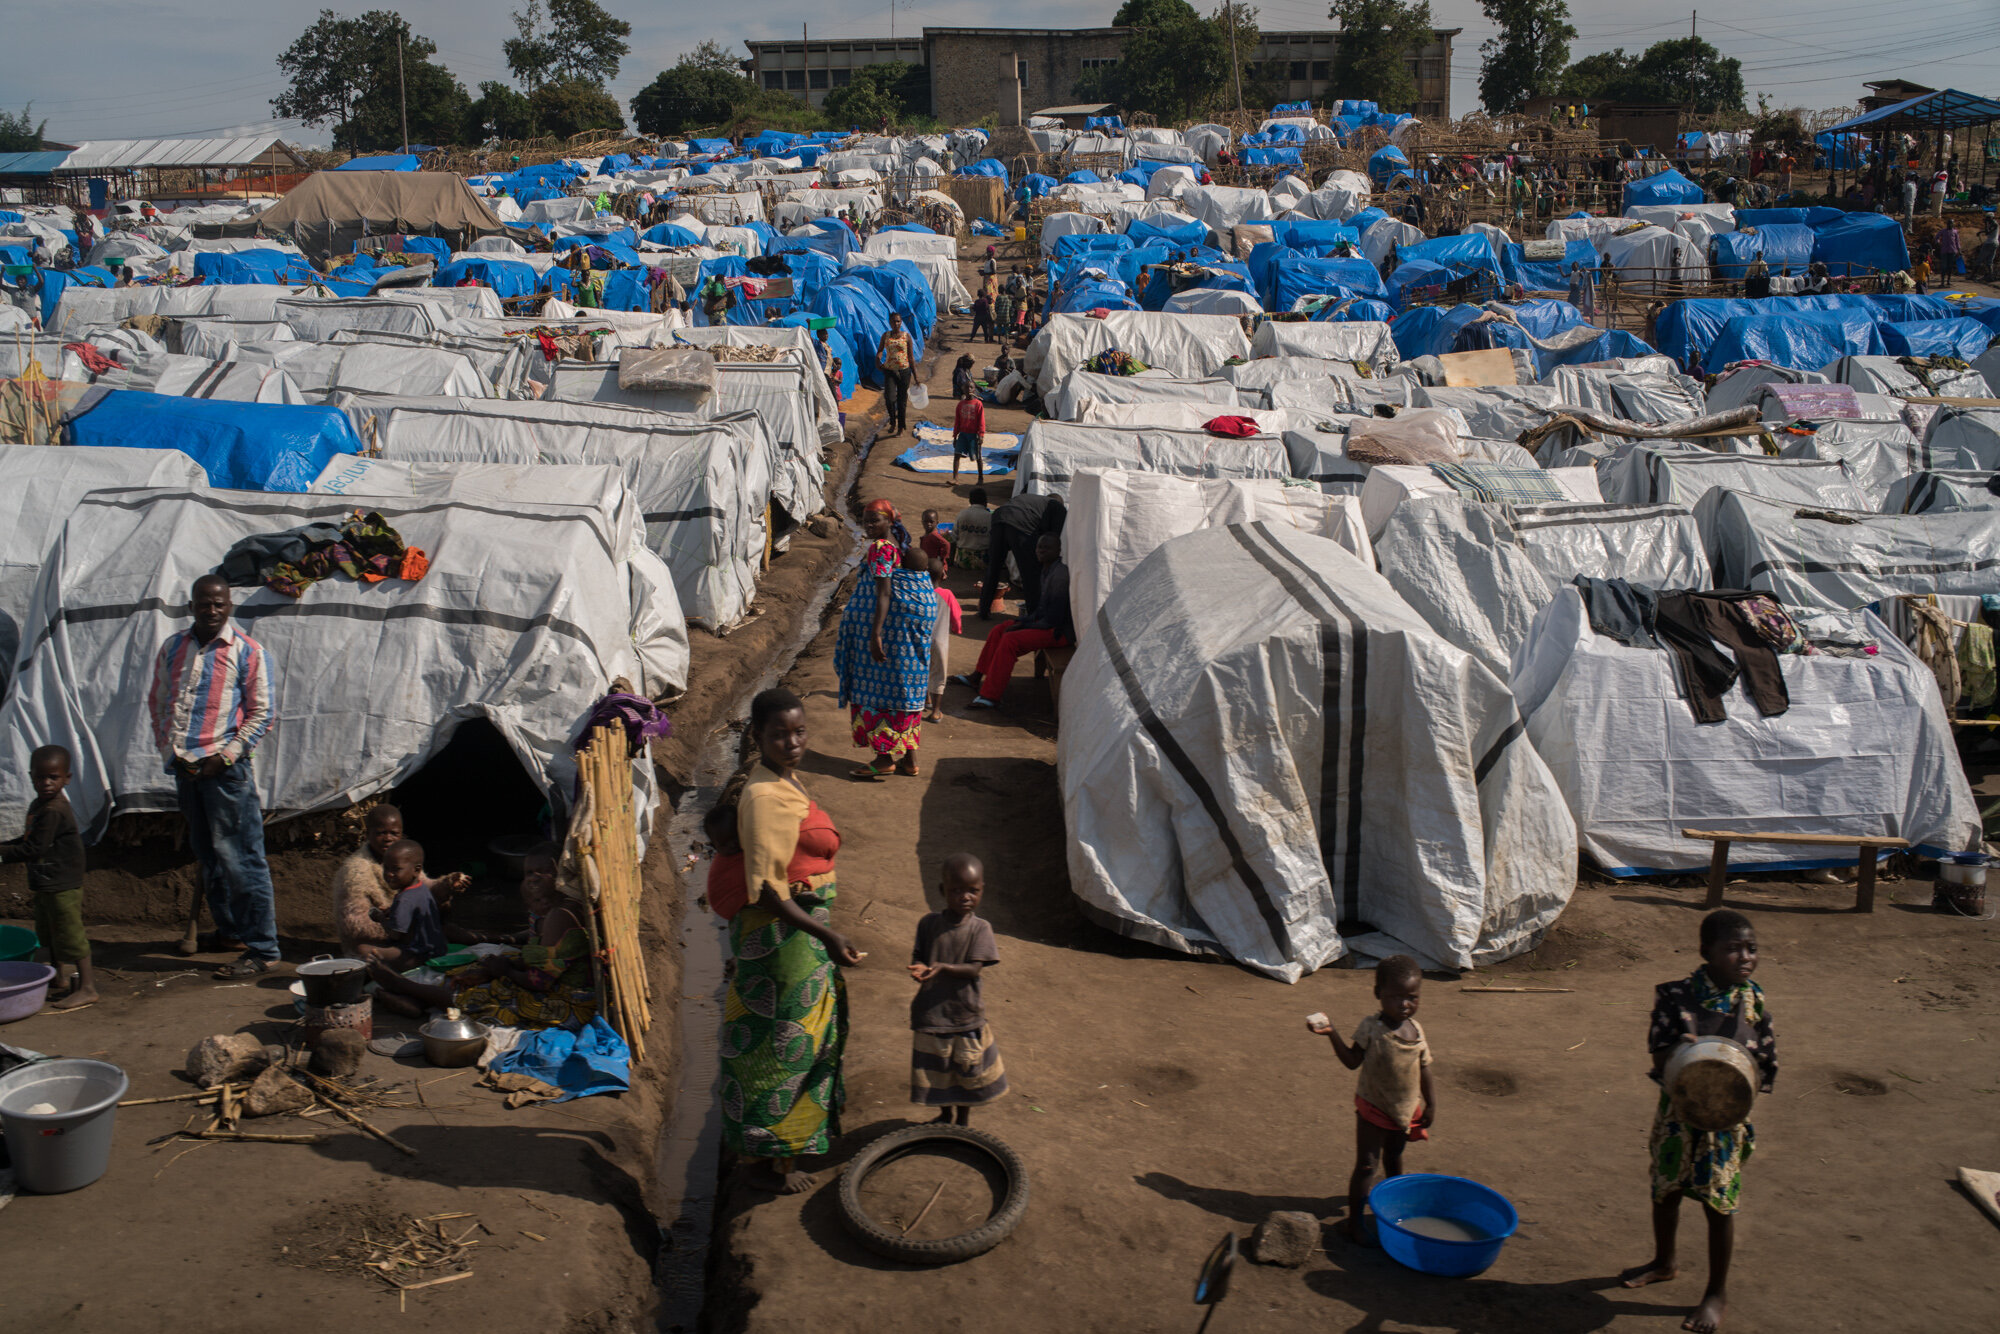  IDPs in the largest camp in Bunia, host to apporximately 10,0000 people.  A second camp in Bunia hosts apporximately 4400 people. According to UN OCHA, the total number of those displaced to Bunia, living in camps and with host families is approxima